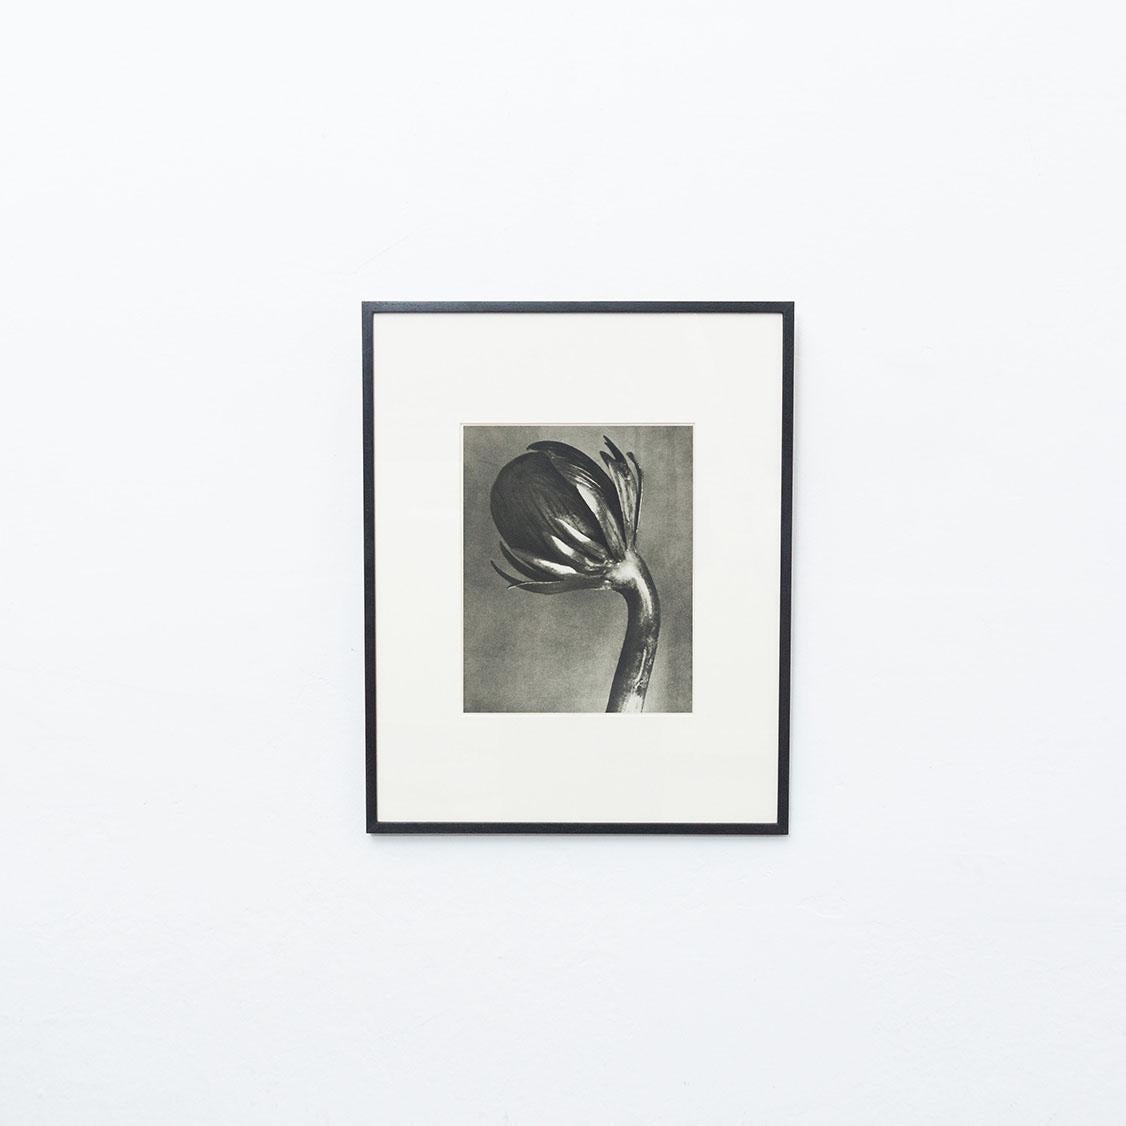 Karl Blossfeldt Photogravure from the edition of the book 'Wunder in der Natur' in 1942.

Photography number 91. 
In original condition, with minor wear consistent with age and use, preserving a beautiful patina.

Karl Blossfeldt (June 13, 1865